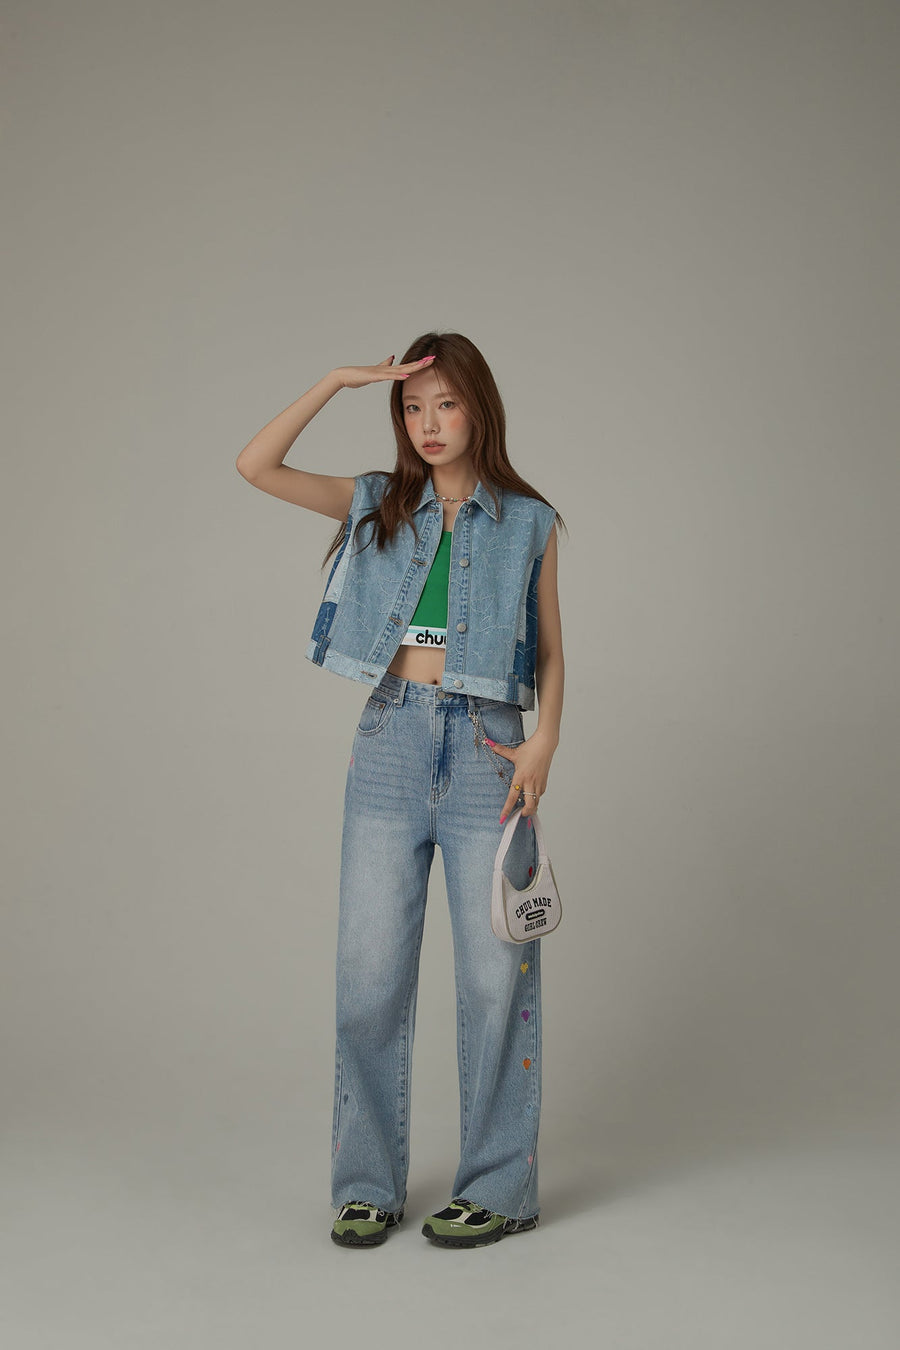 CHUU Colorful Heart Embroidered Denim Straight Wide Jeans